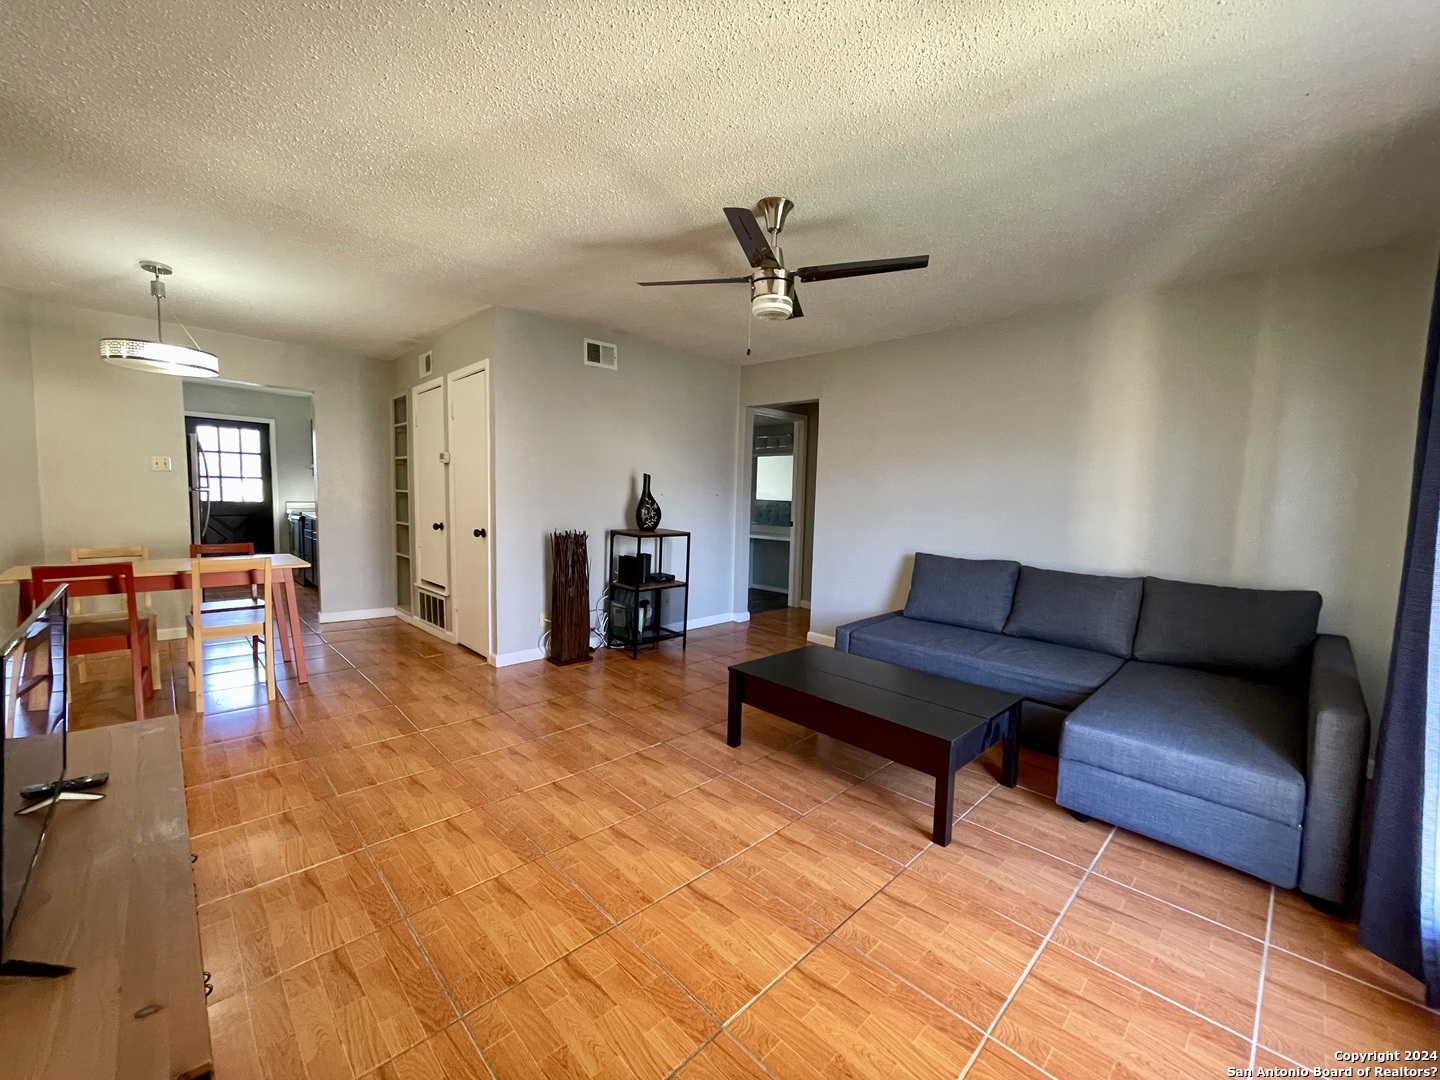 Photo of 6611 Southpoint St in San Antonio, TX